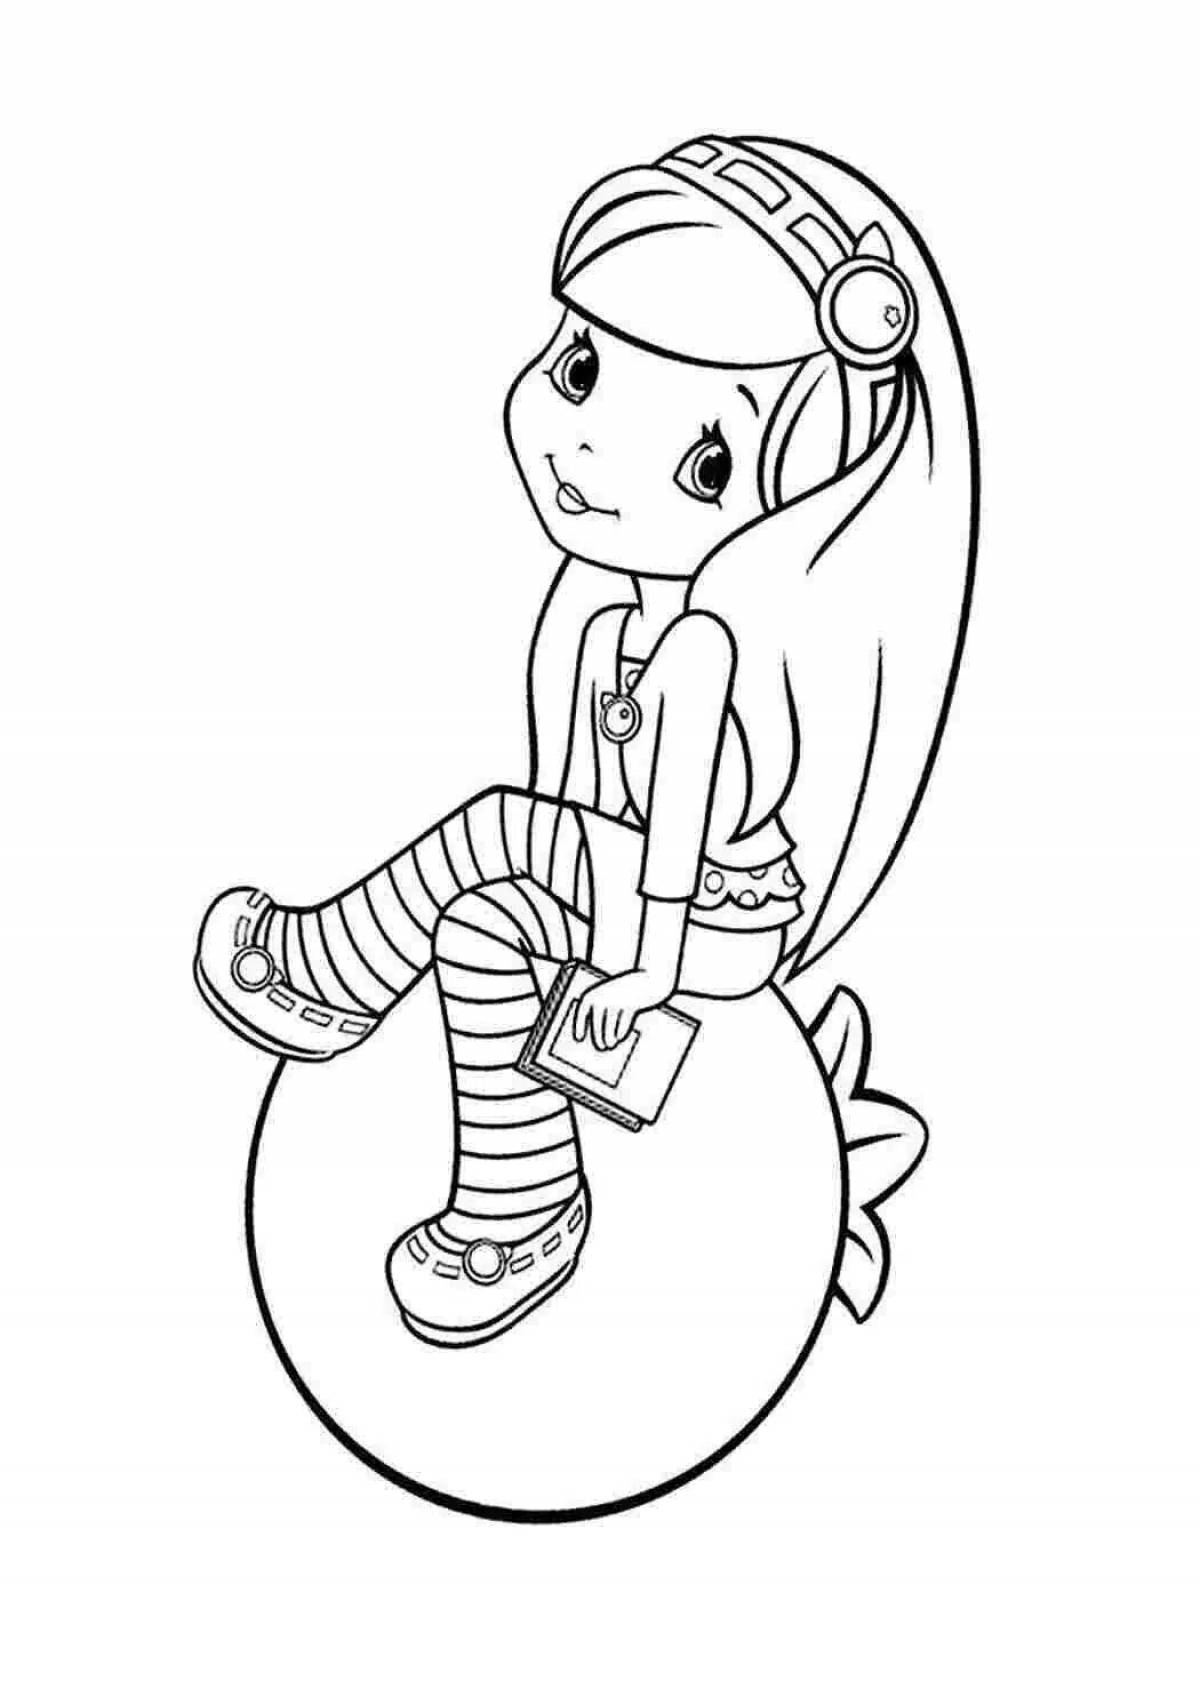 Refreshing charlotte strawberry coloring page for girls